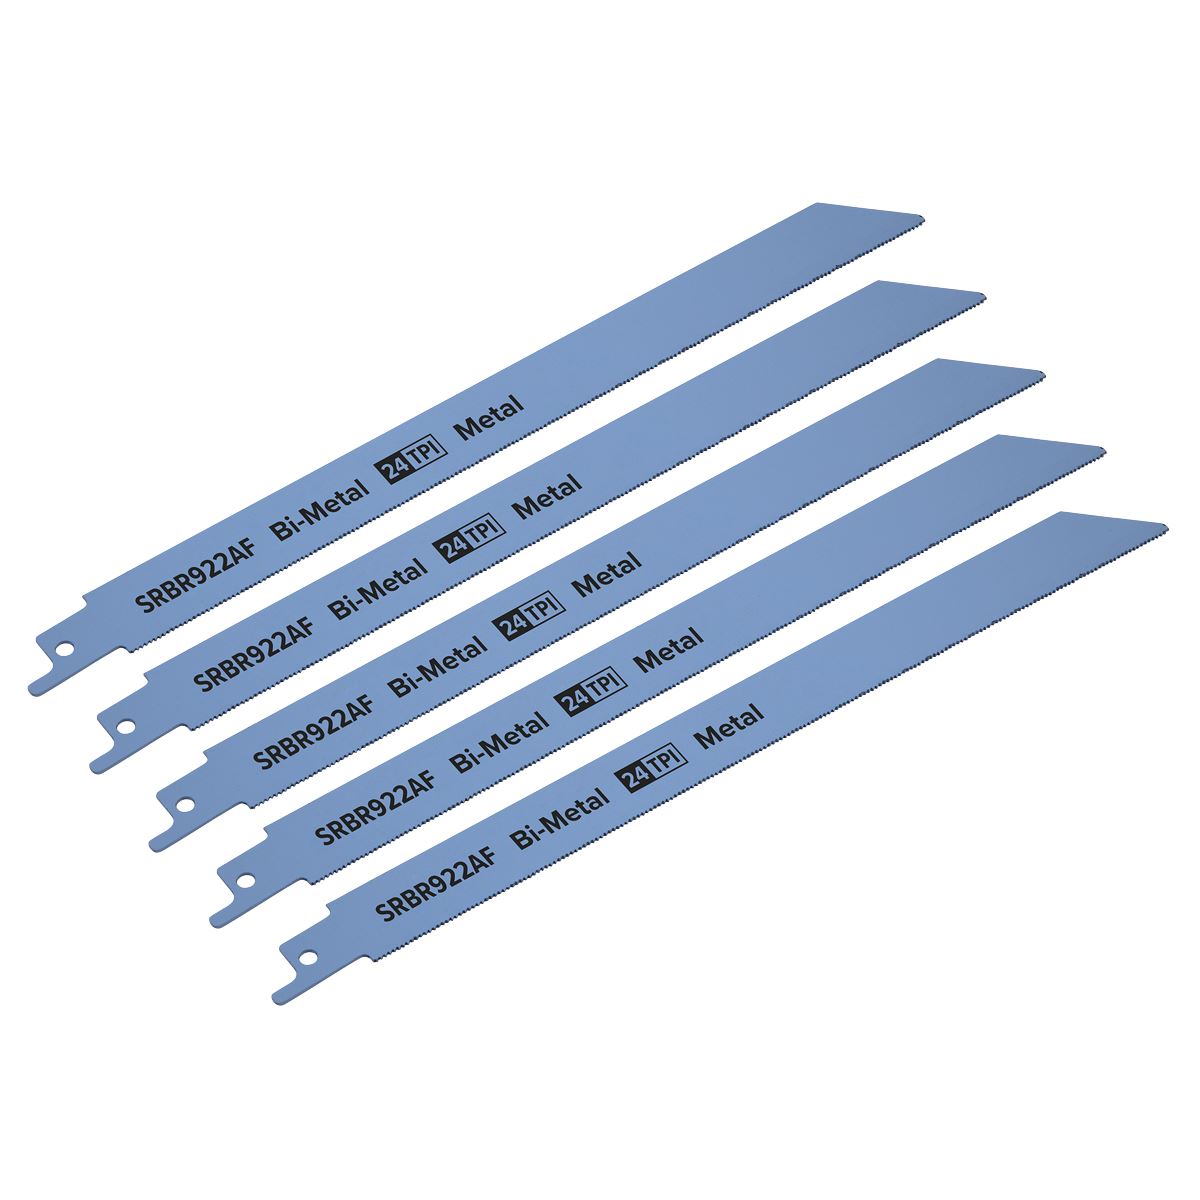 Sealey Reciprocating Saw Blade Metal 230mm 24tpi - Pack of 5